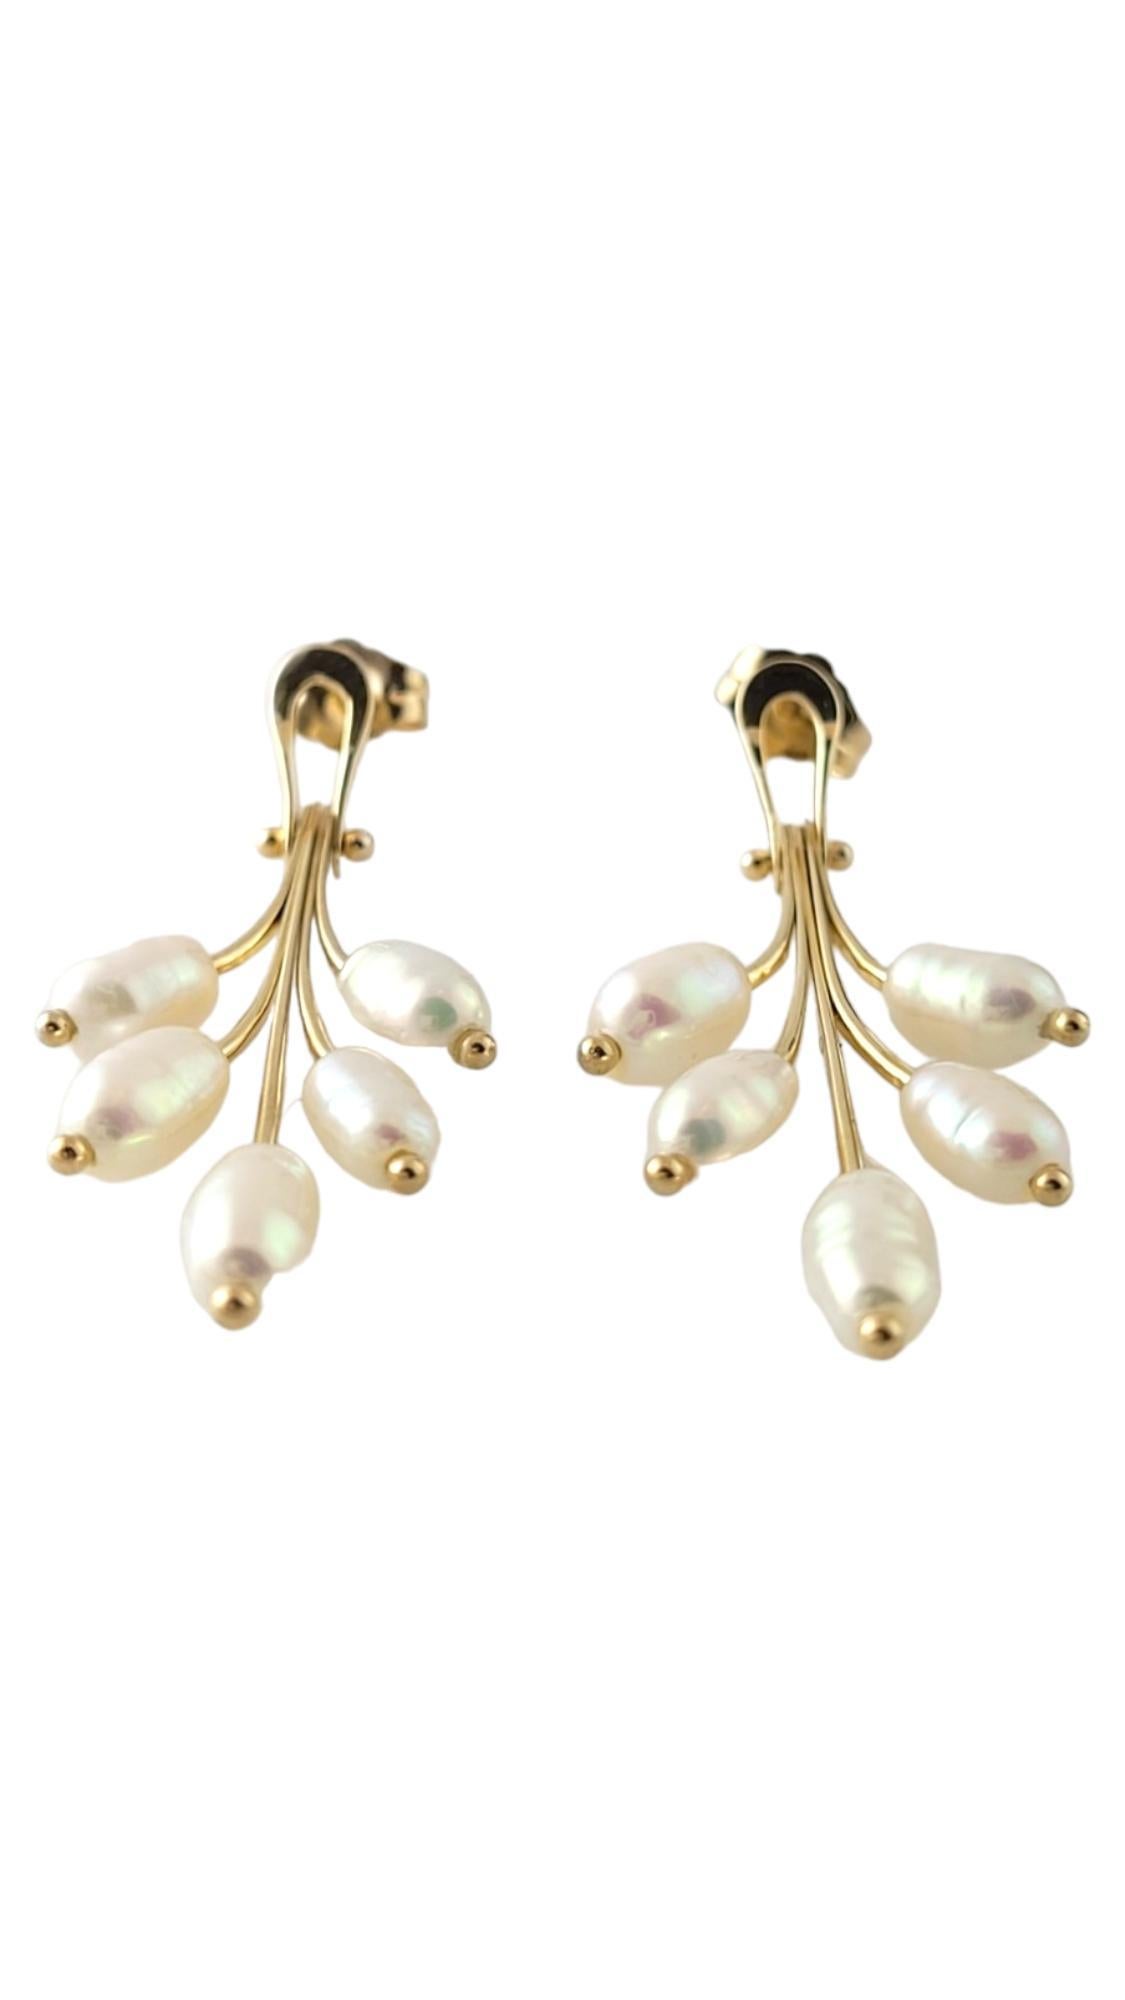 14K Yellow Gold Freshwater Pearl Dangle Earrings

These stunning 14K gold dangle earrings have 10 beautiful freshwater pearls that give a gorgeous look!

Pearls: approximately 6.16mm X 4.12mm

Size: 38.9mm X 16.6mm X 4.2mm

Weight: 2.5 dwt/ 3.8